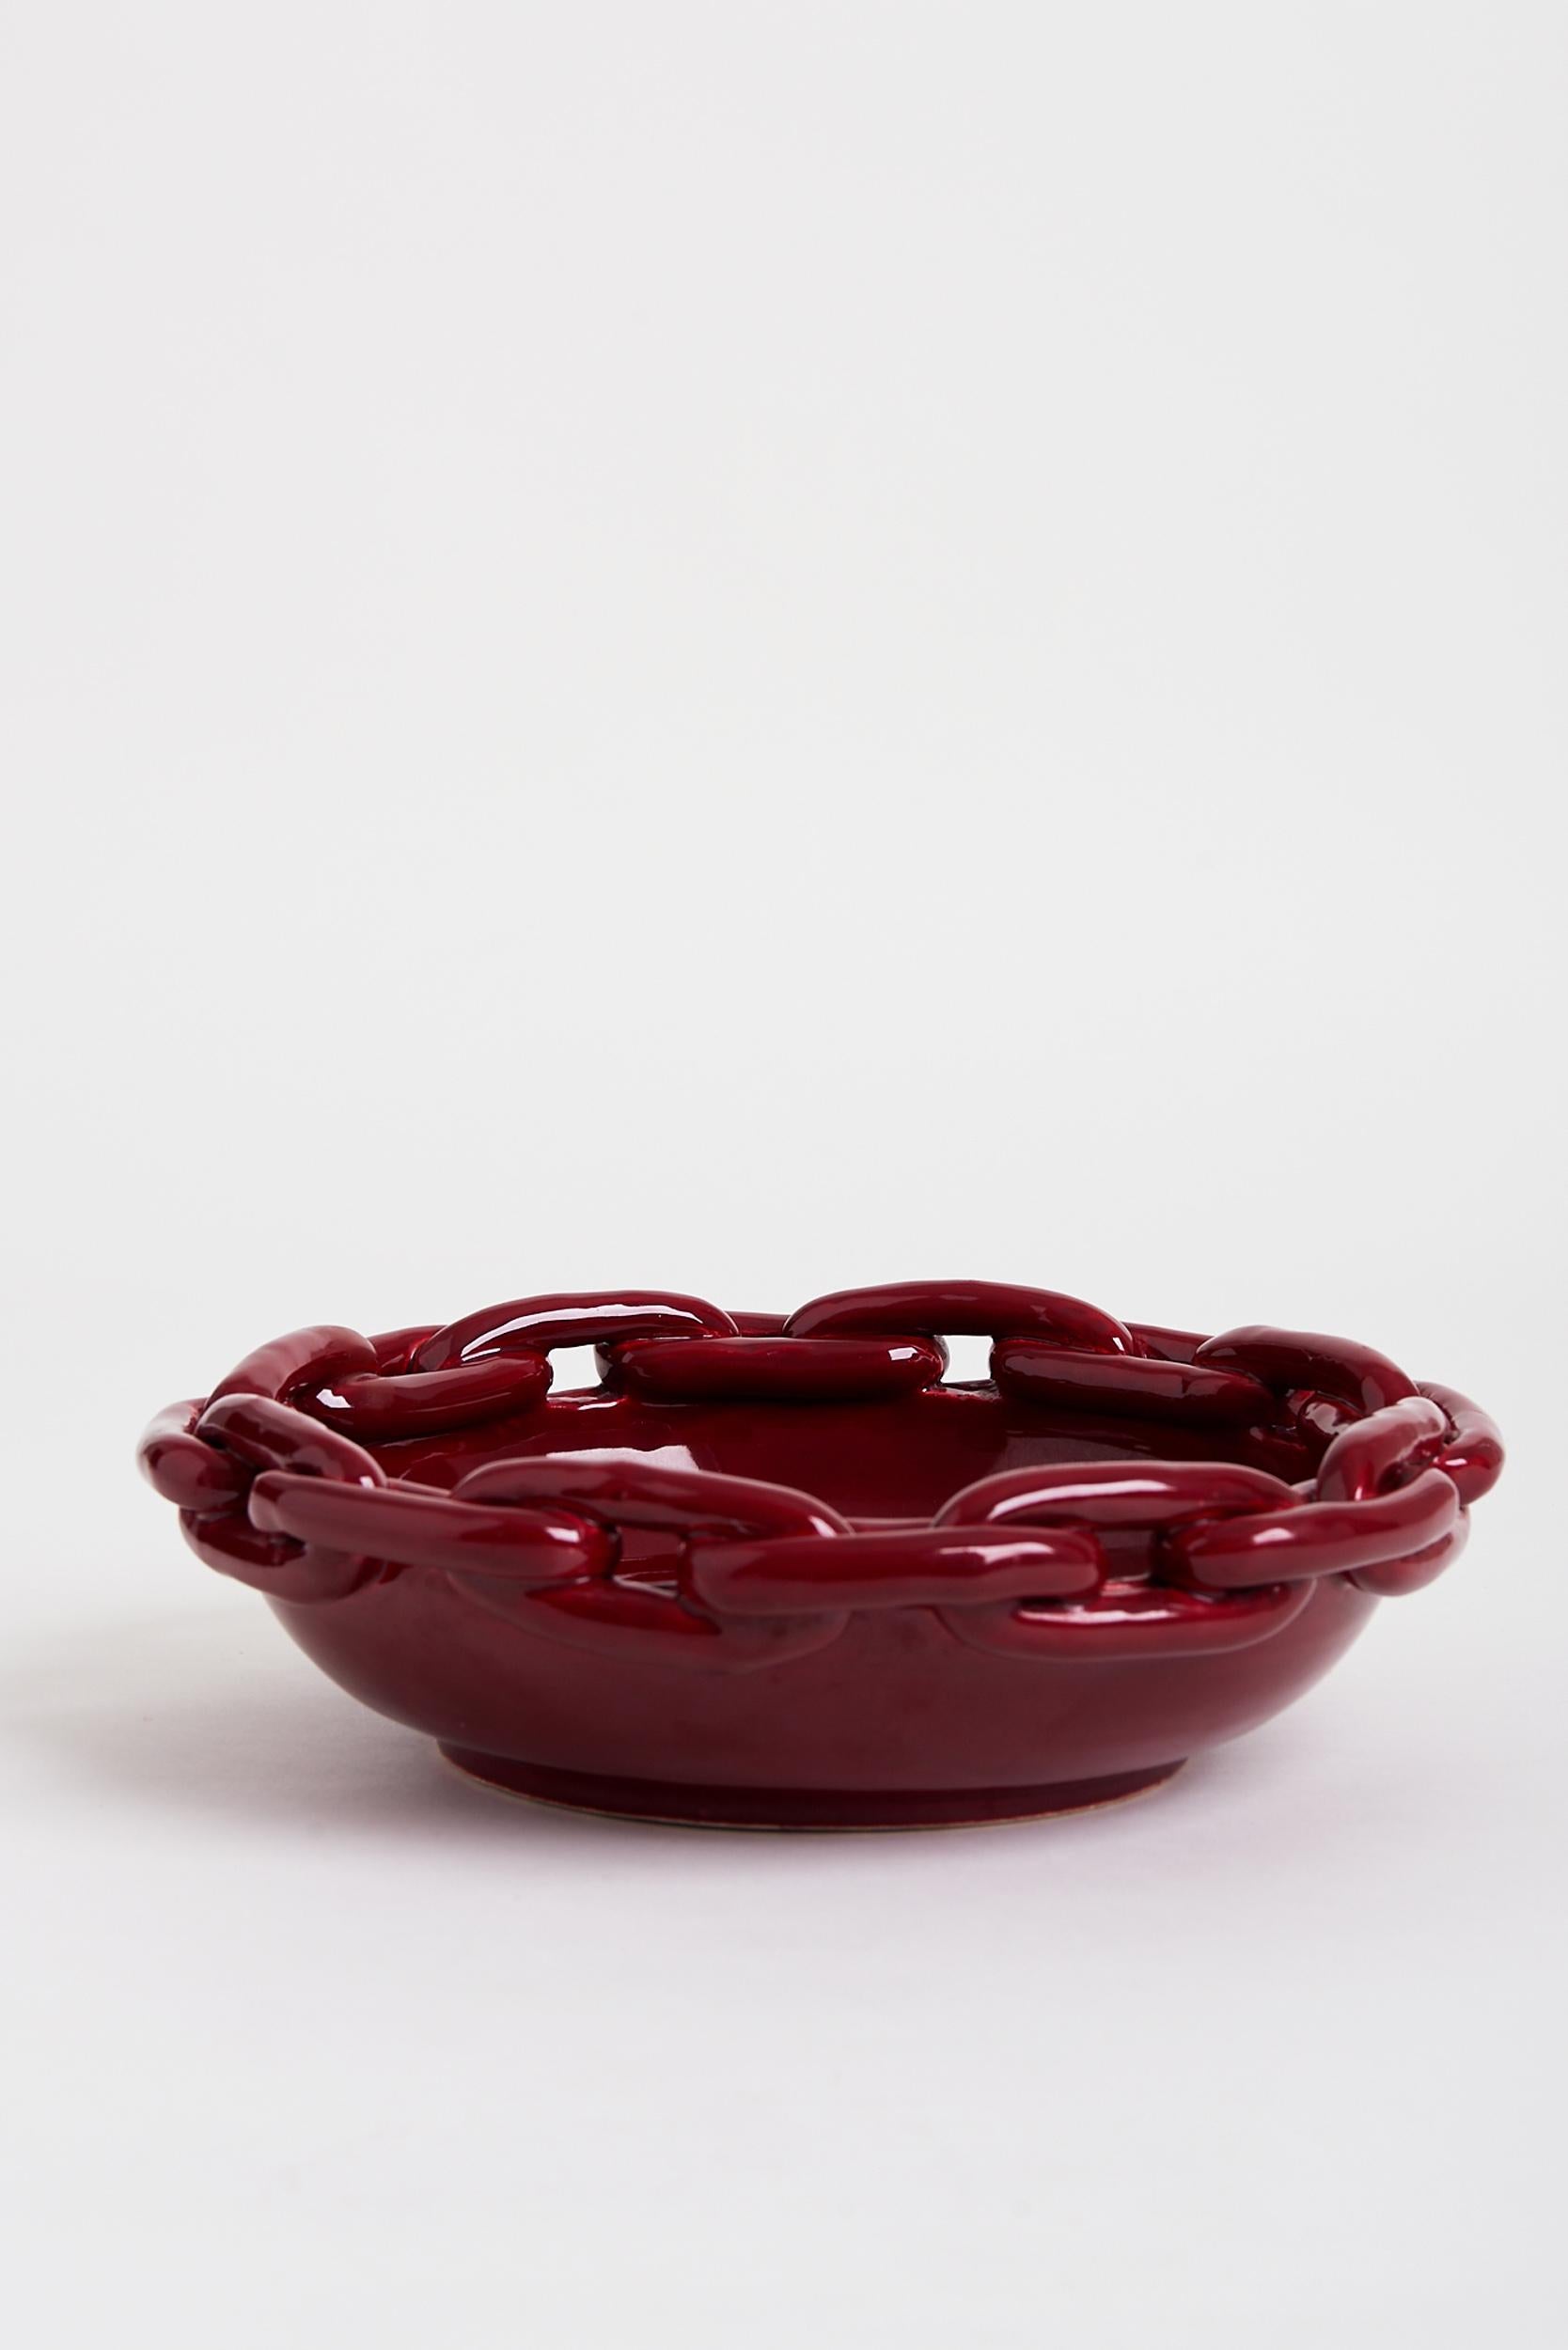 French Red Chain Links Ceramic Bowl Attributed to Jerome Massier